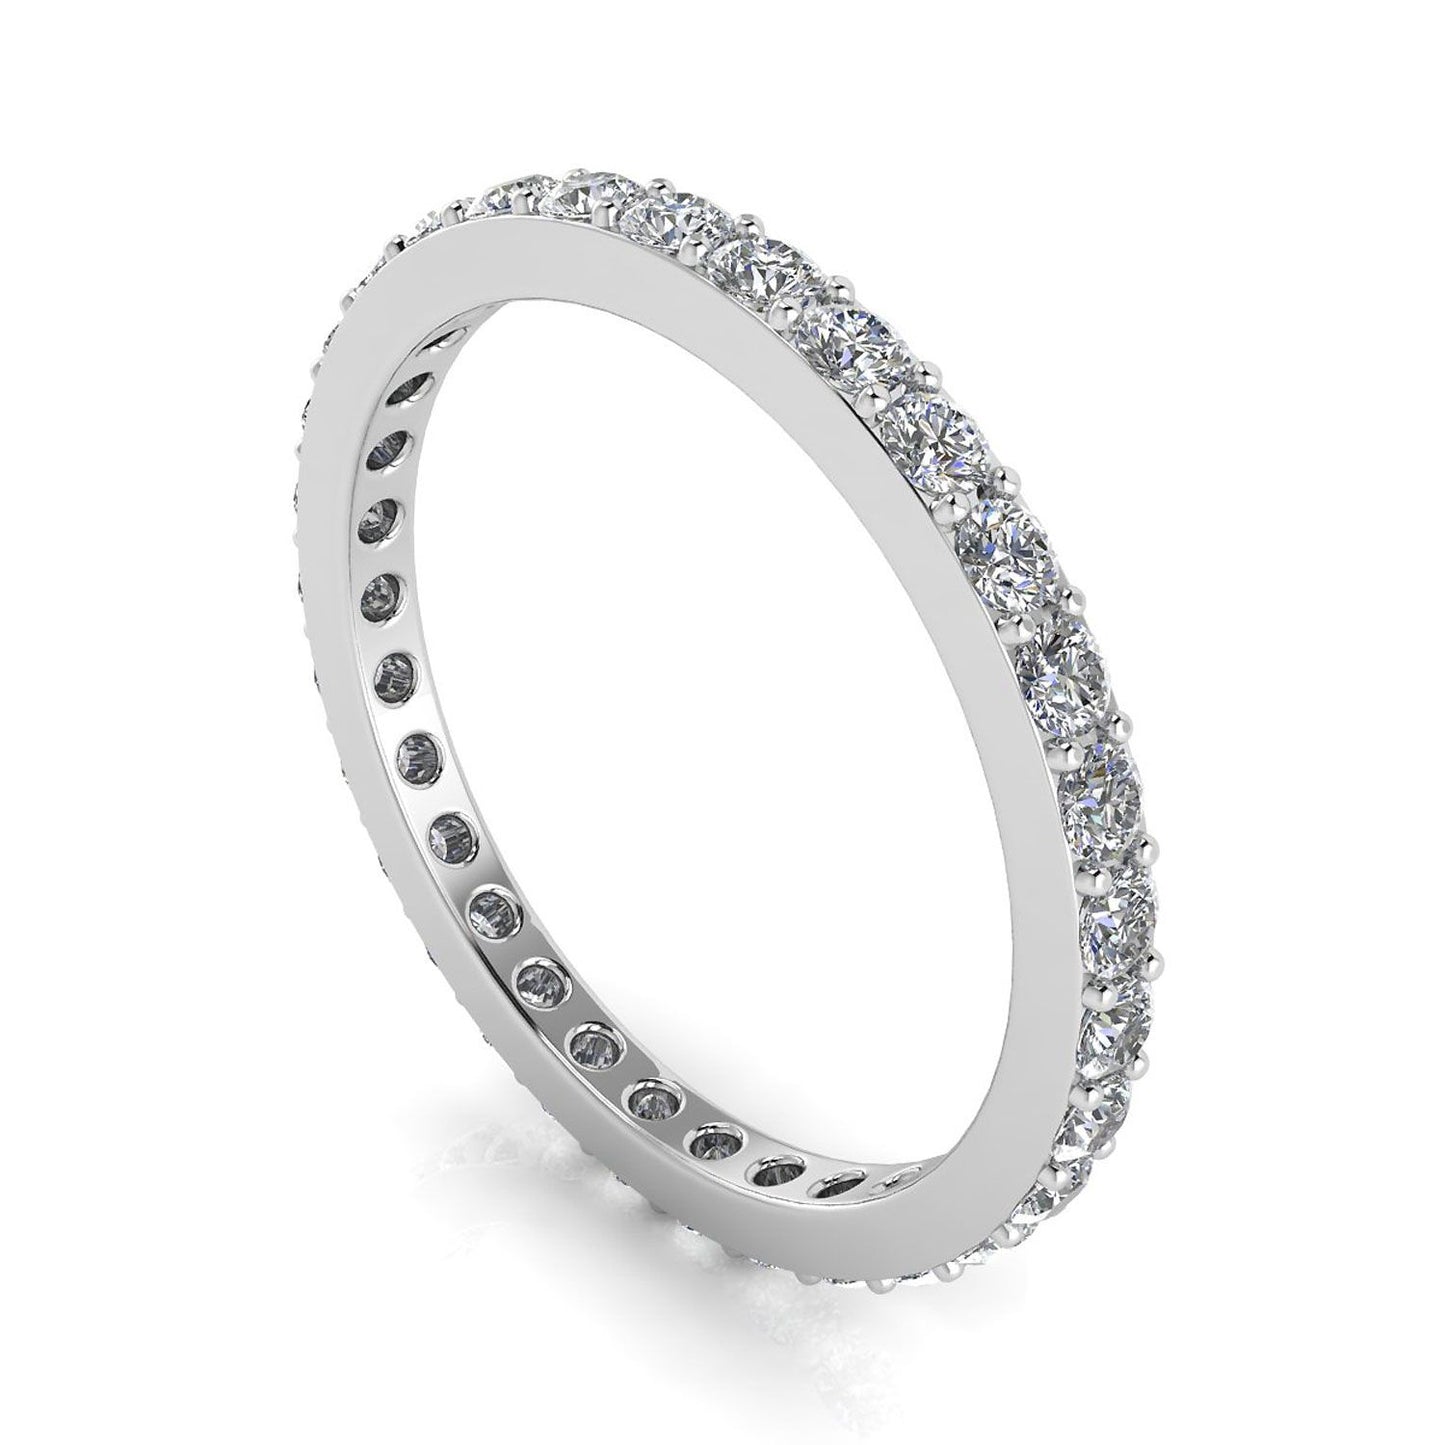 Round Brilliant Cut Diamond Pave Set Eternity Ring In 18k White Gold  (0.47ct. Tw.) Ring Size 6.5